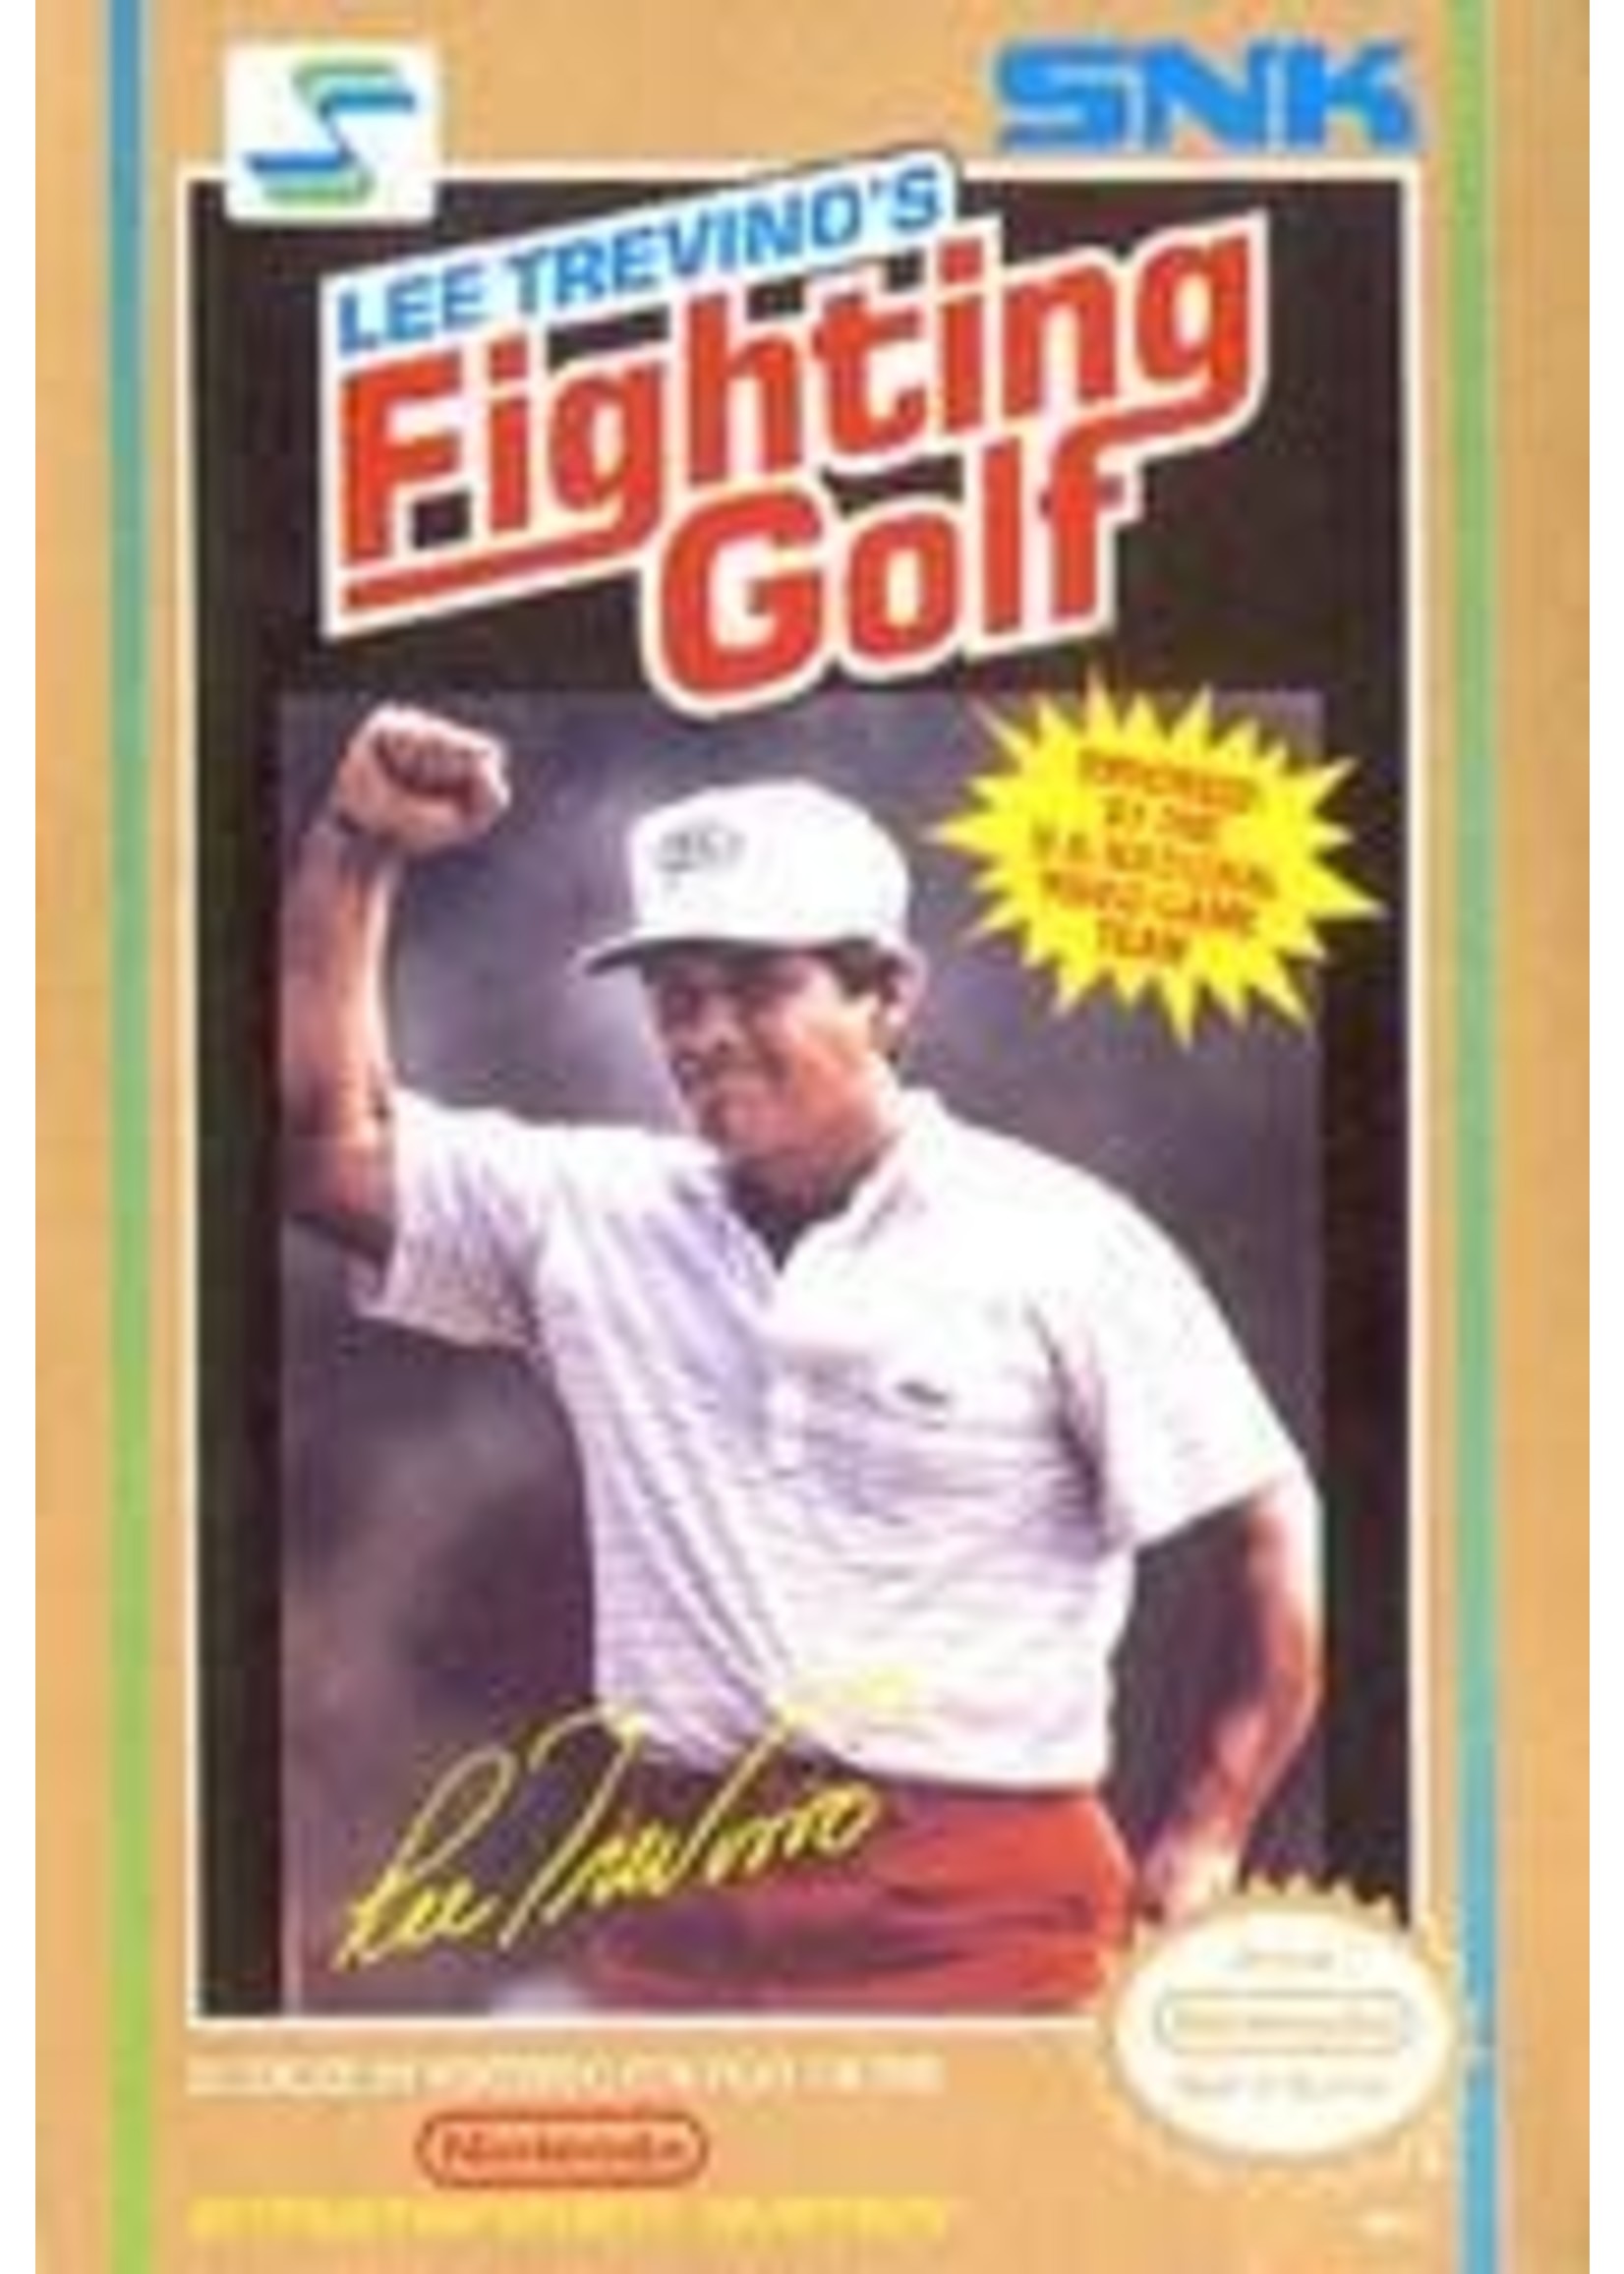 Lee Trevino's Fighting Golf NES CART ONLY